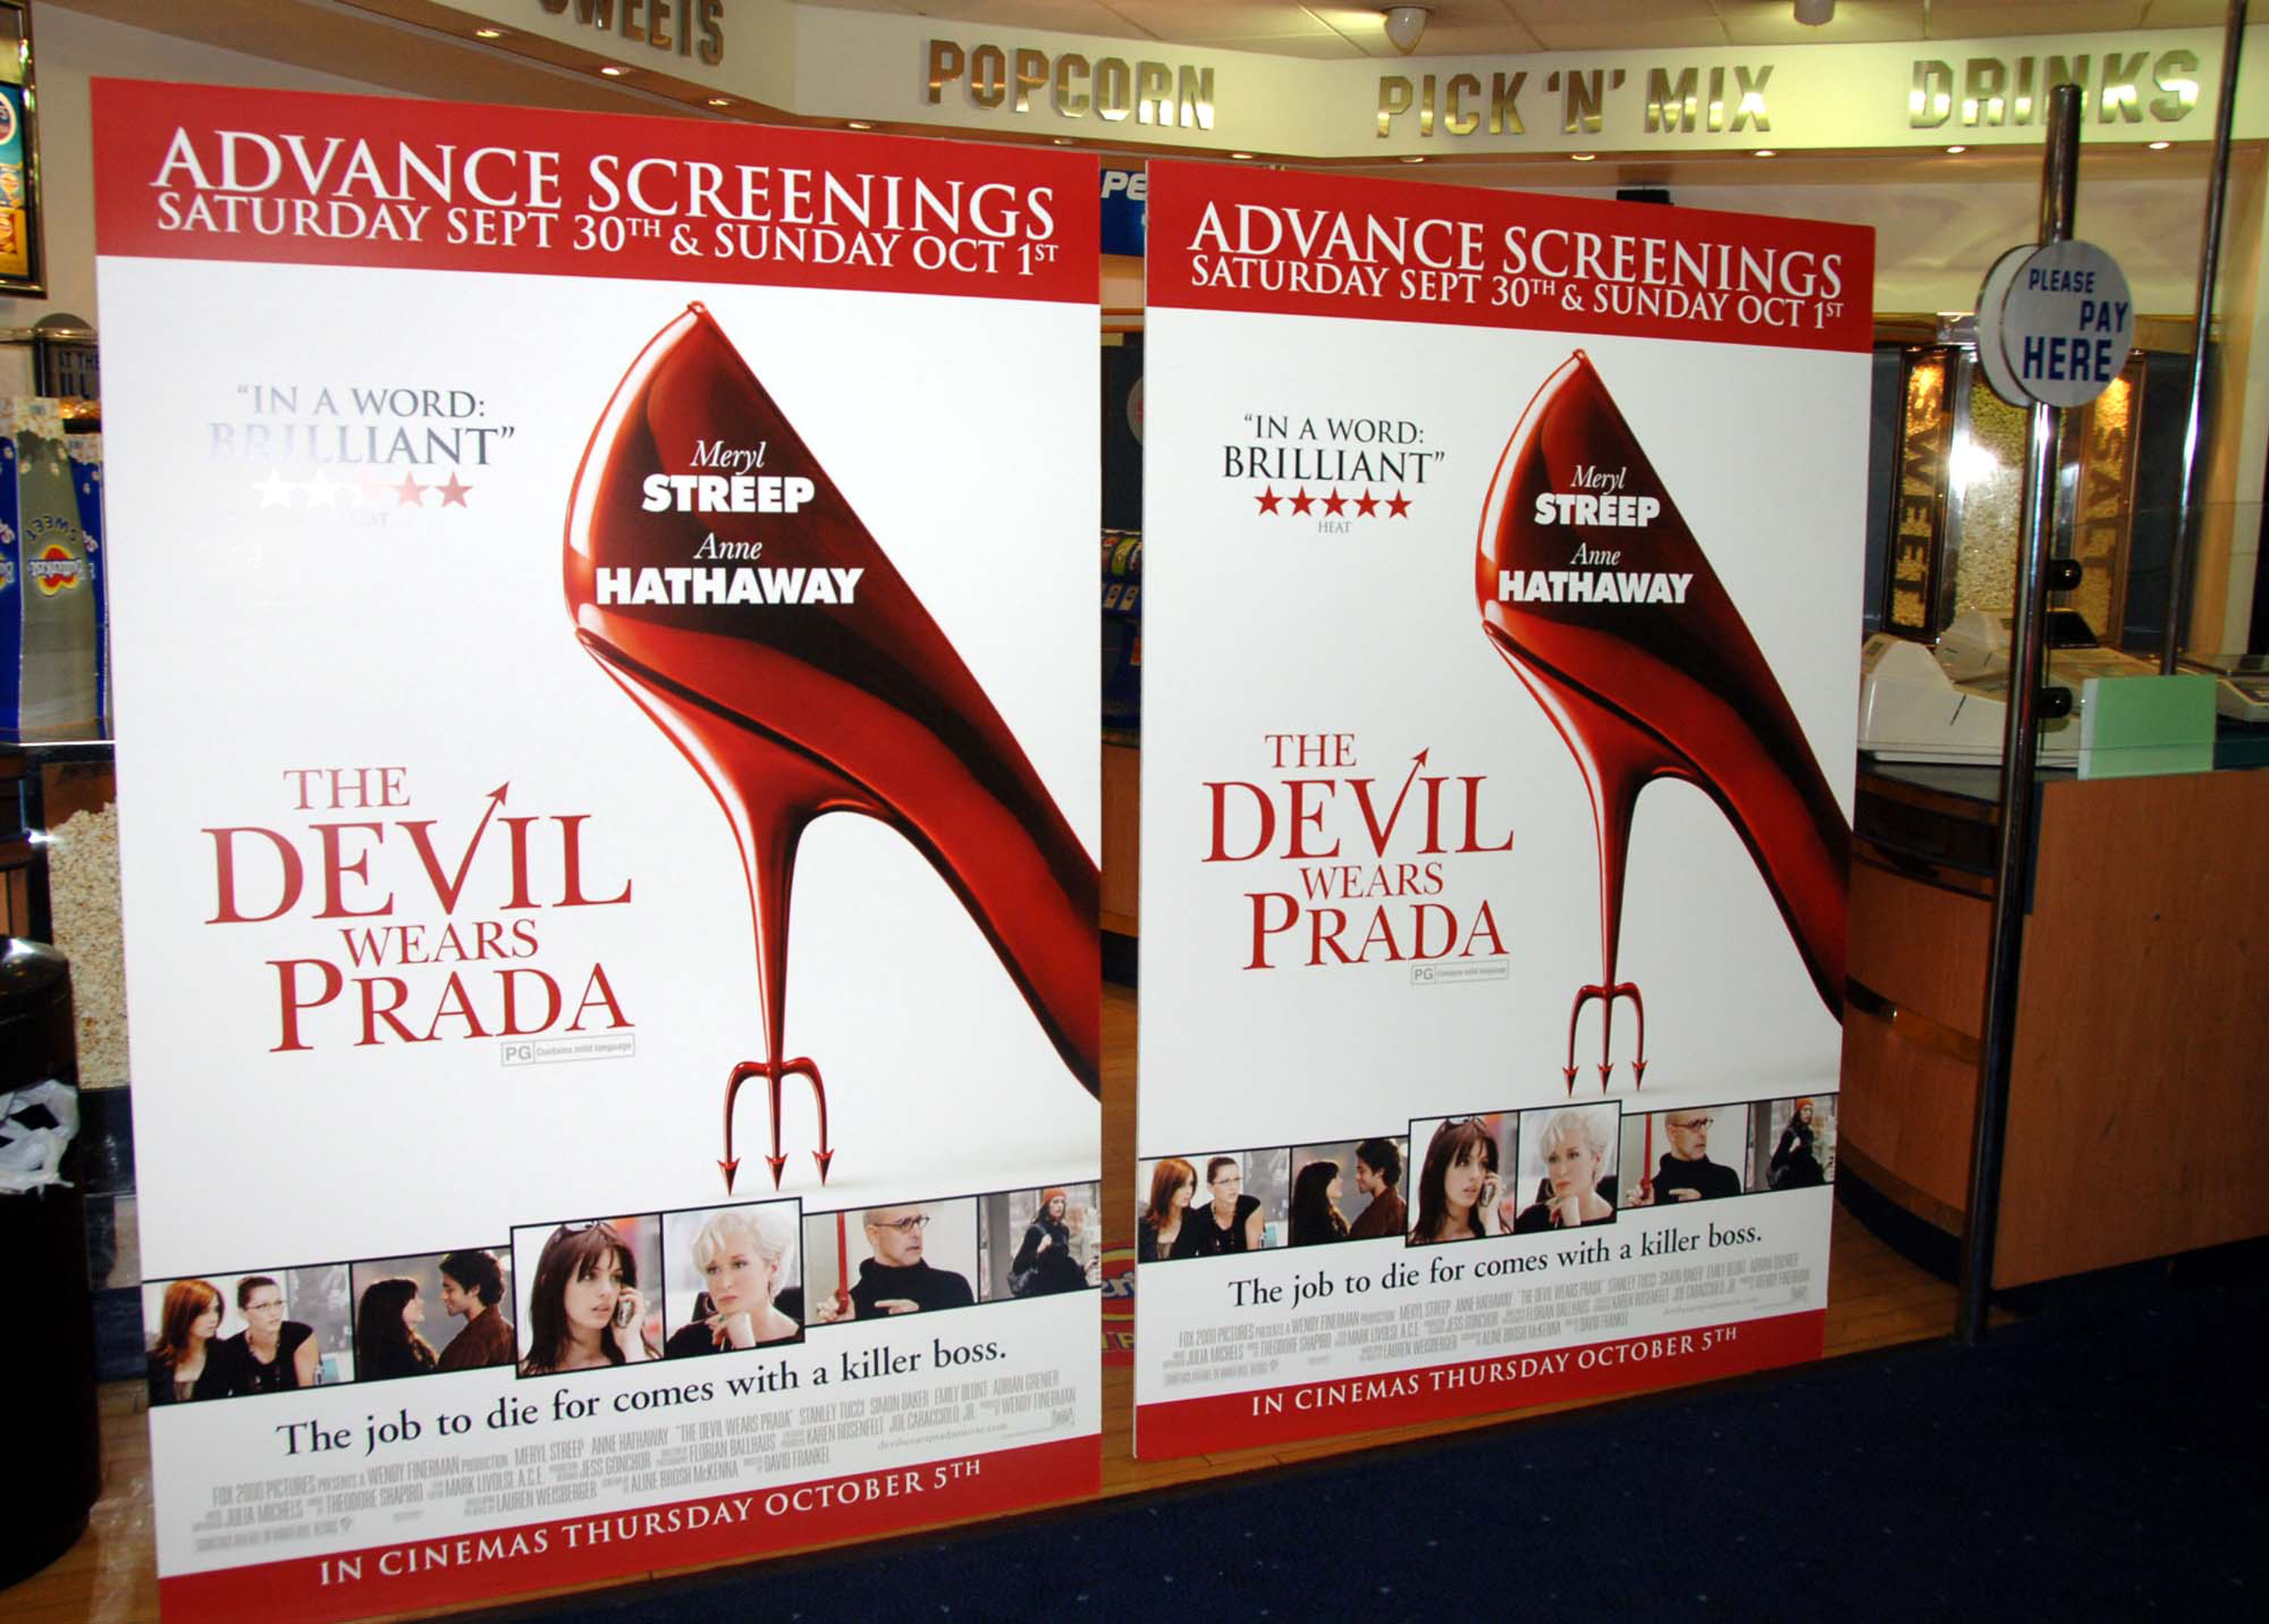 ‘The Devil Wears Prada' is officially getting a sequel after 18 years